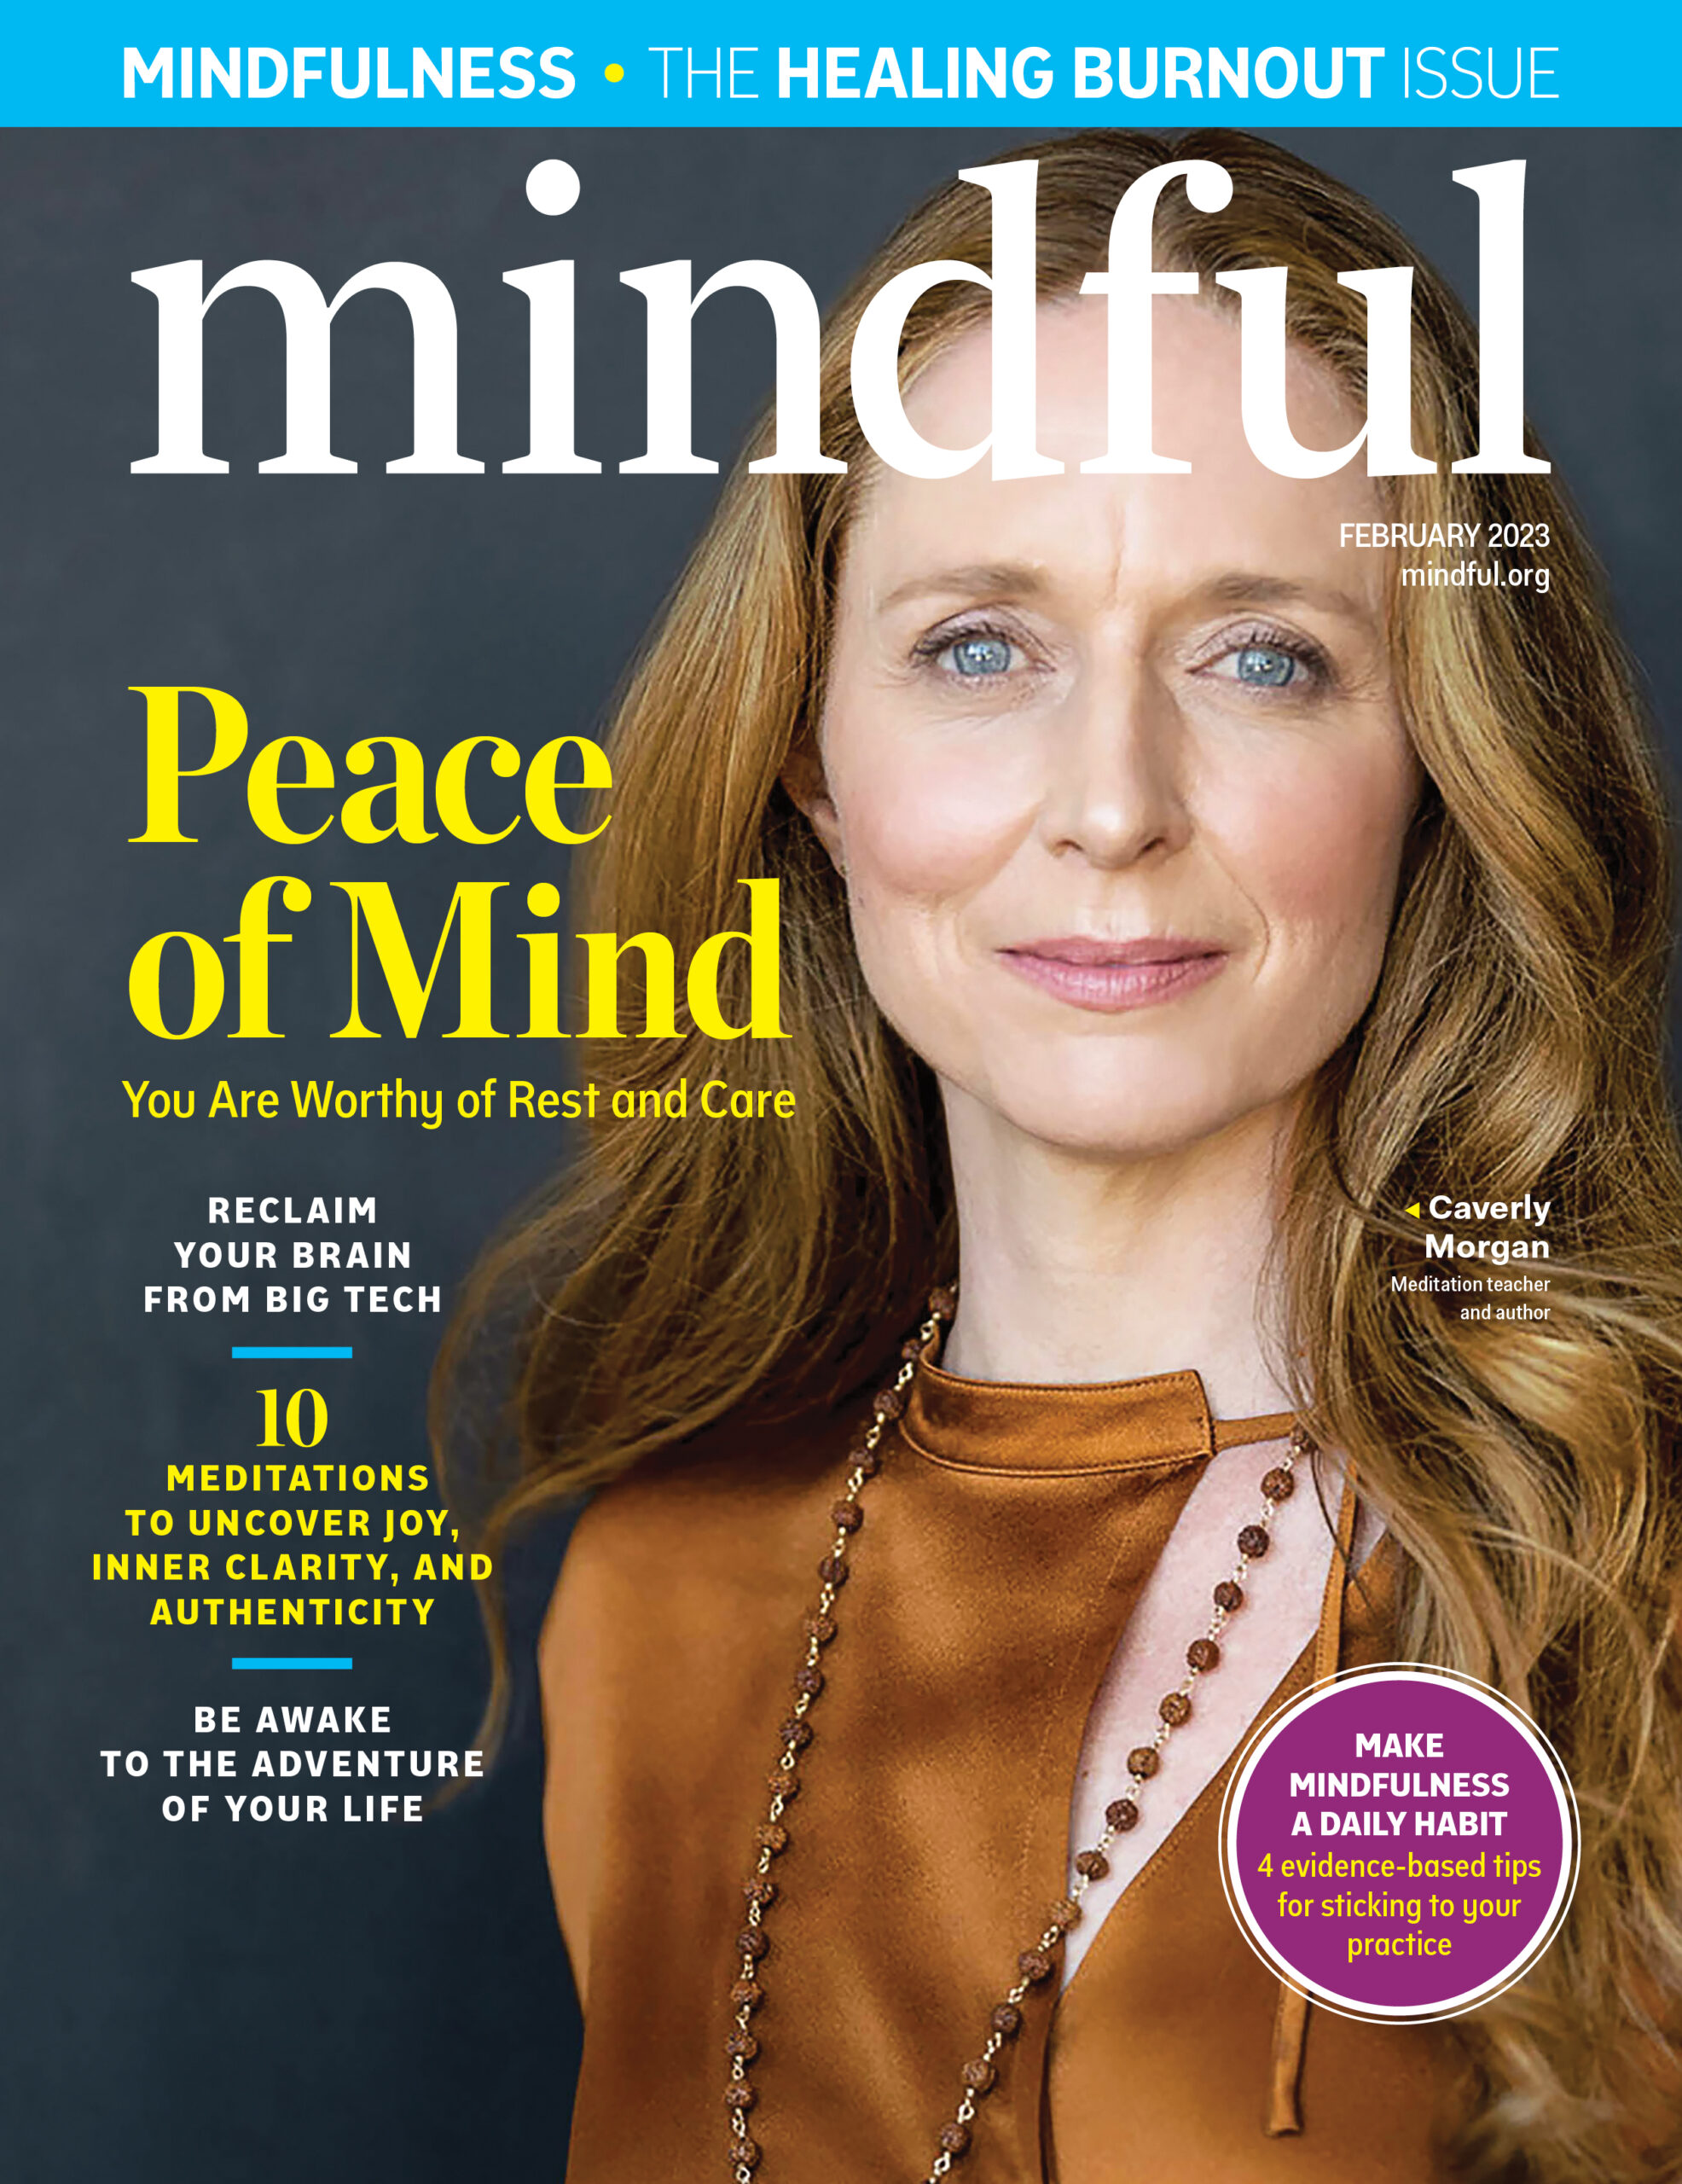 Mindful Magazine - The Healing Burnout Issue